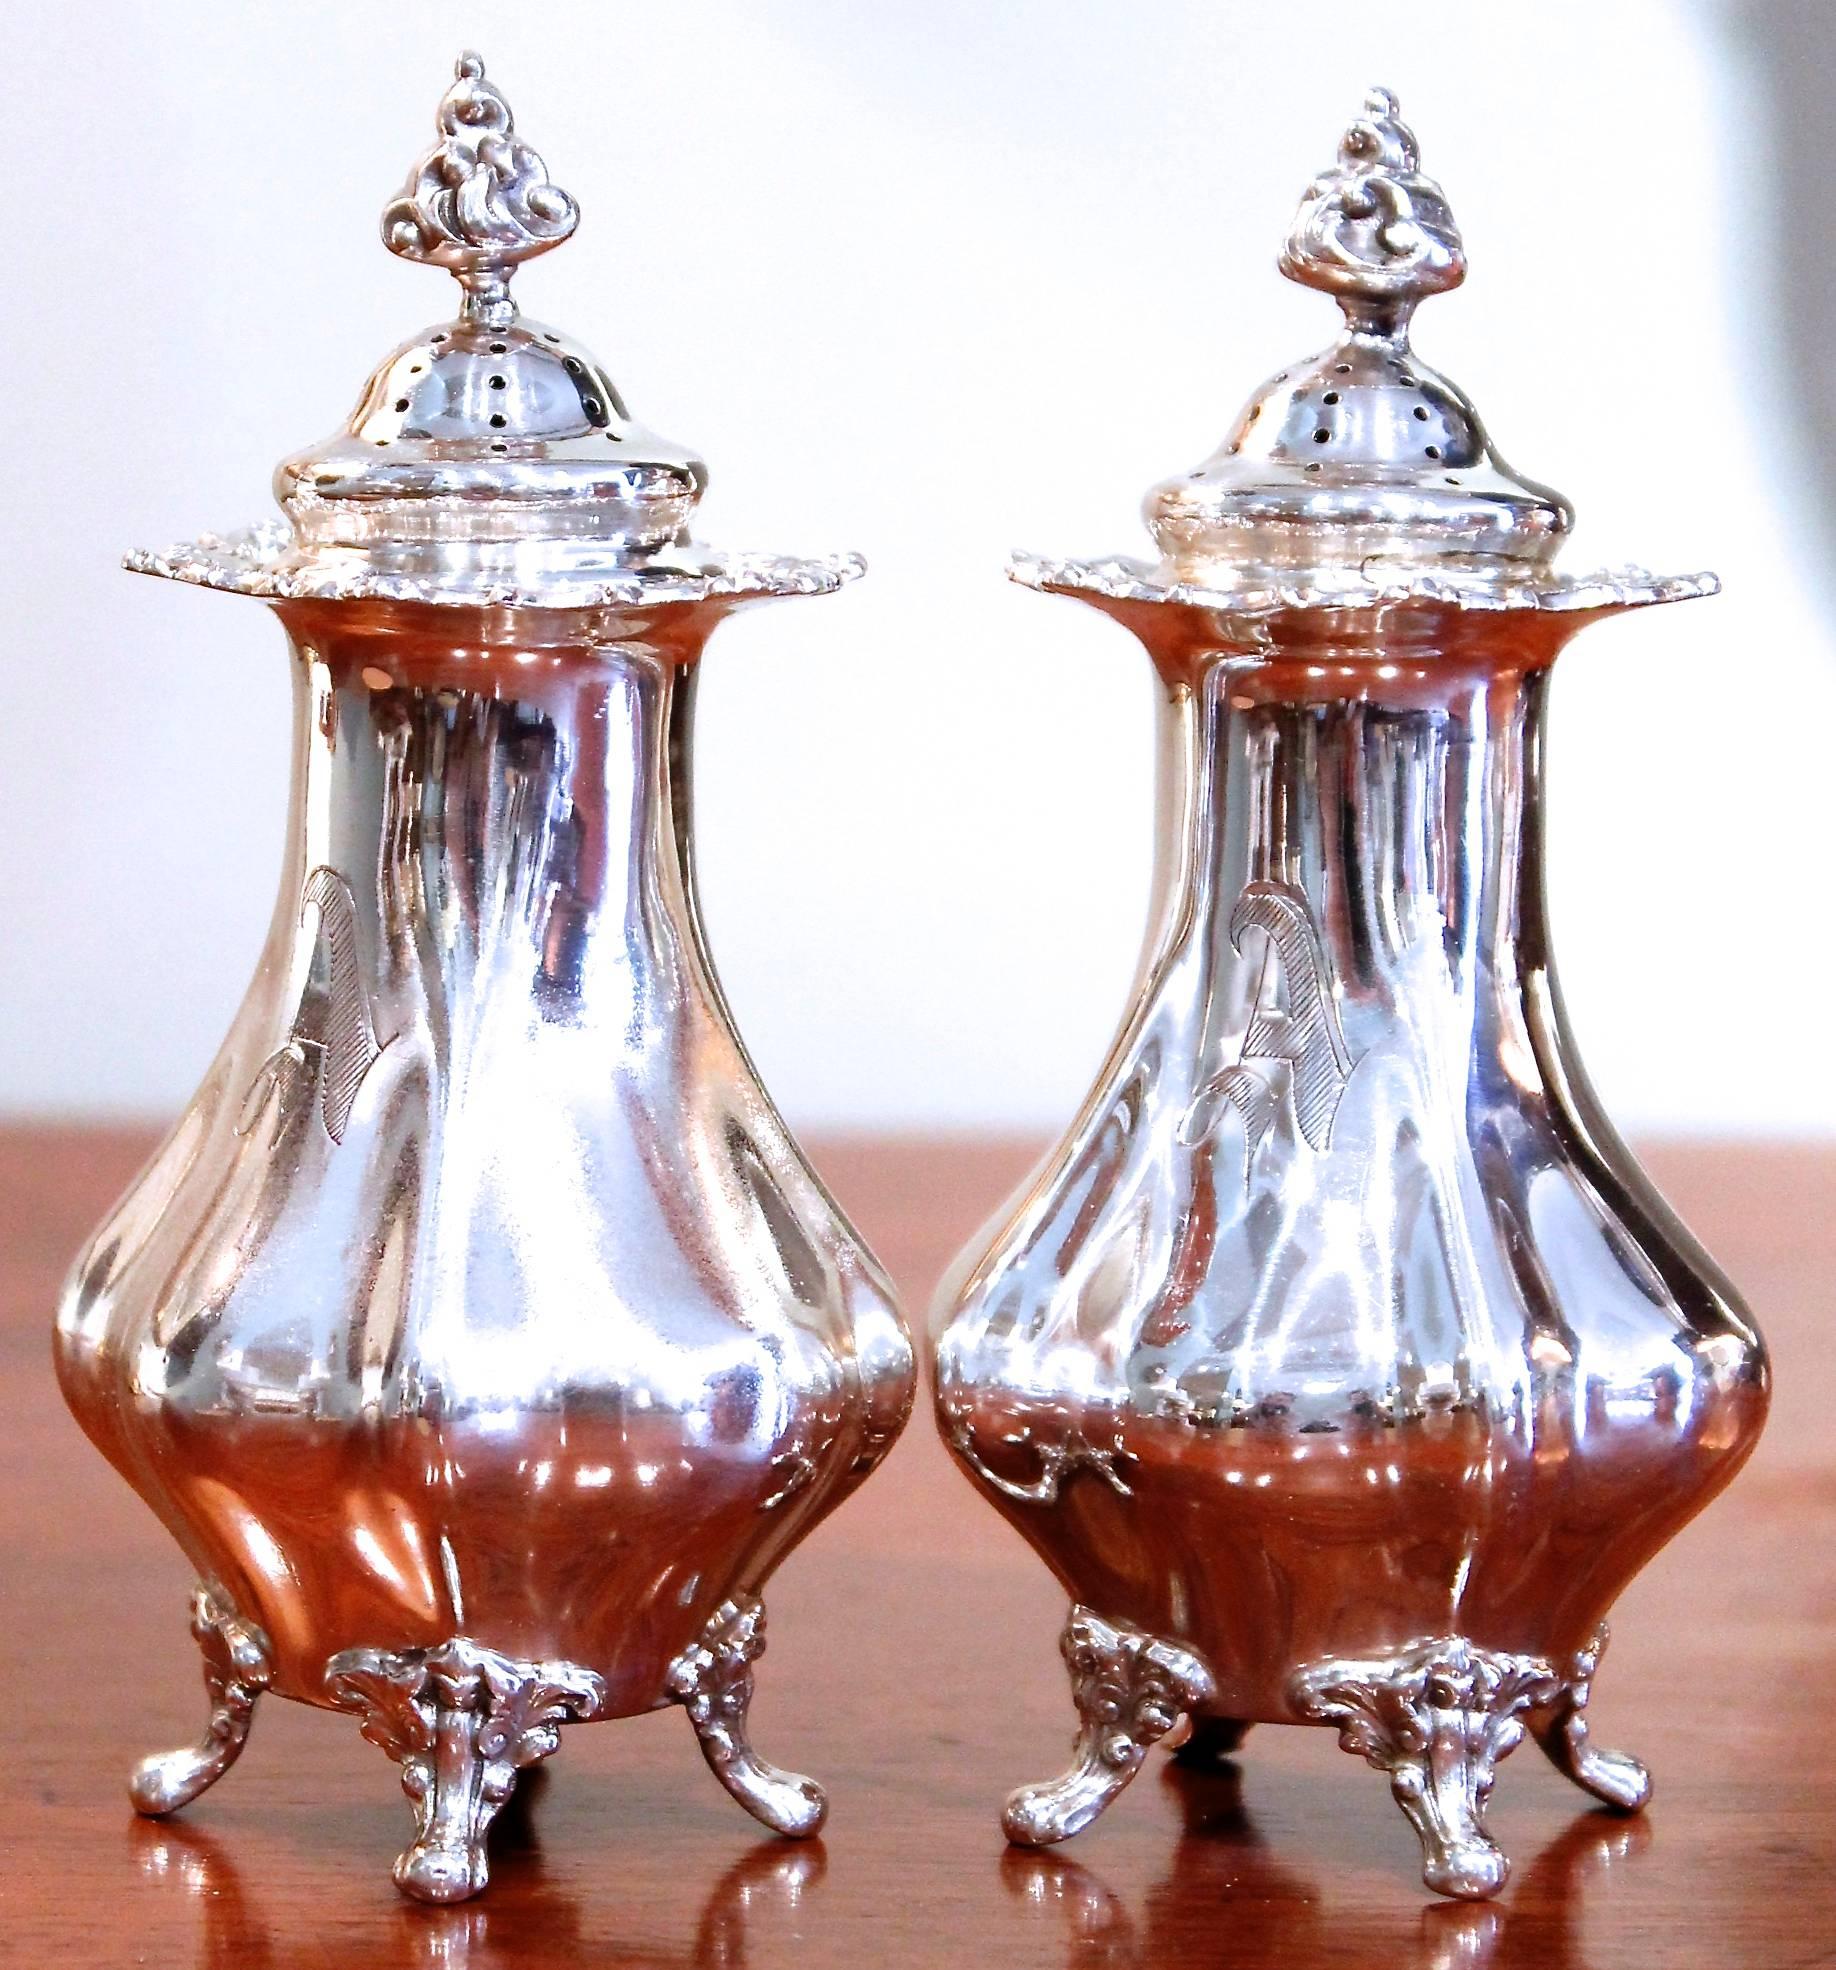 A handsome pair of tall footed shakers of unusual form, with distinctive flame finials, made by the distinguished New York City jewelry firm Black, Starr and Frost, founded in 1876 and active under that name until 1920. Both engraved with the